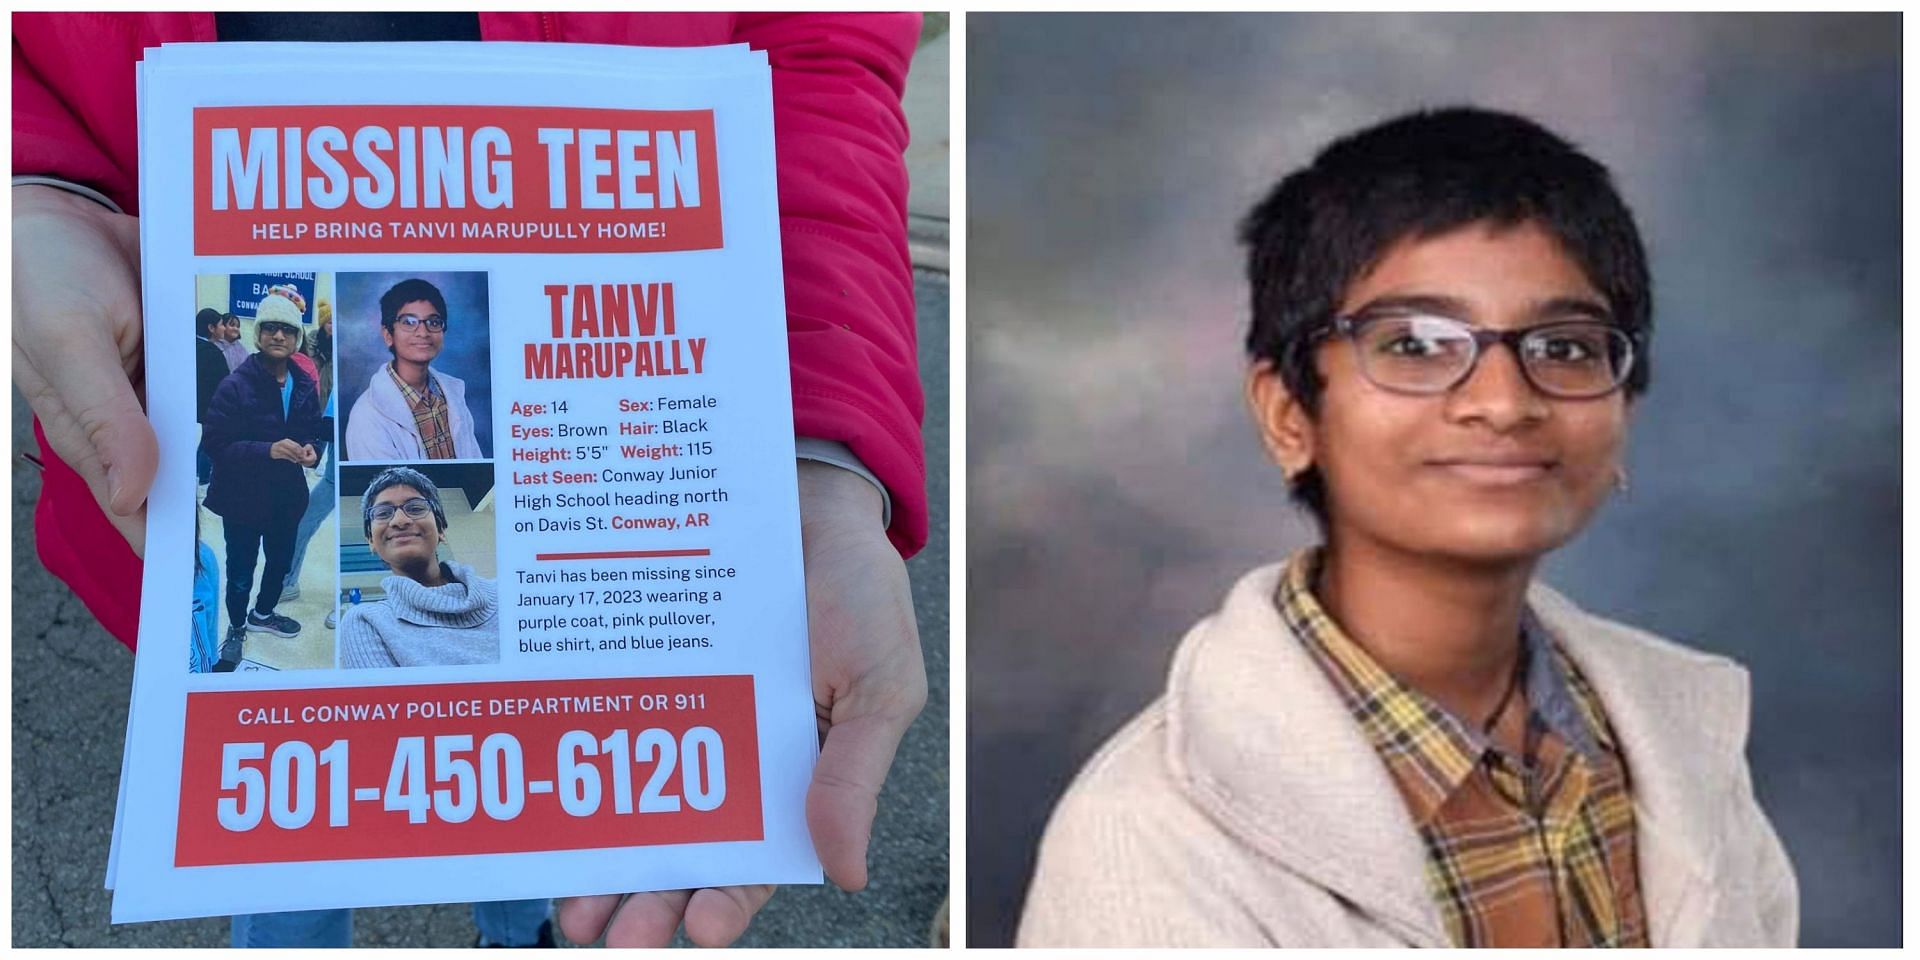 Details explored about Tanvi Marupally after she was found after more than 2 months of being missing. (Image via @ConwayPolice/ Twitter)